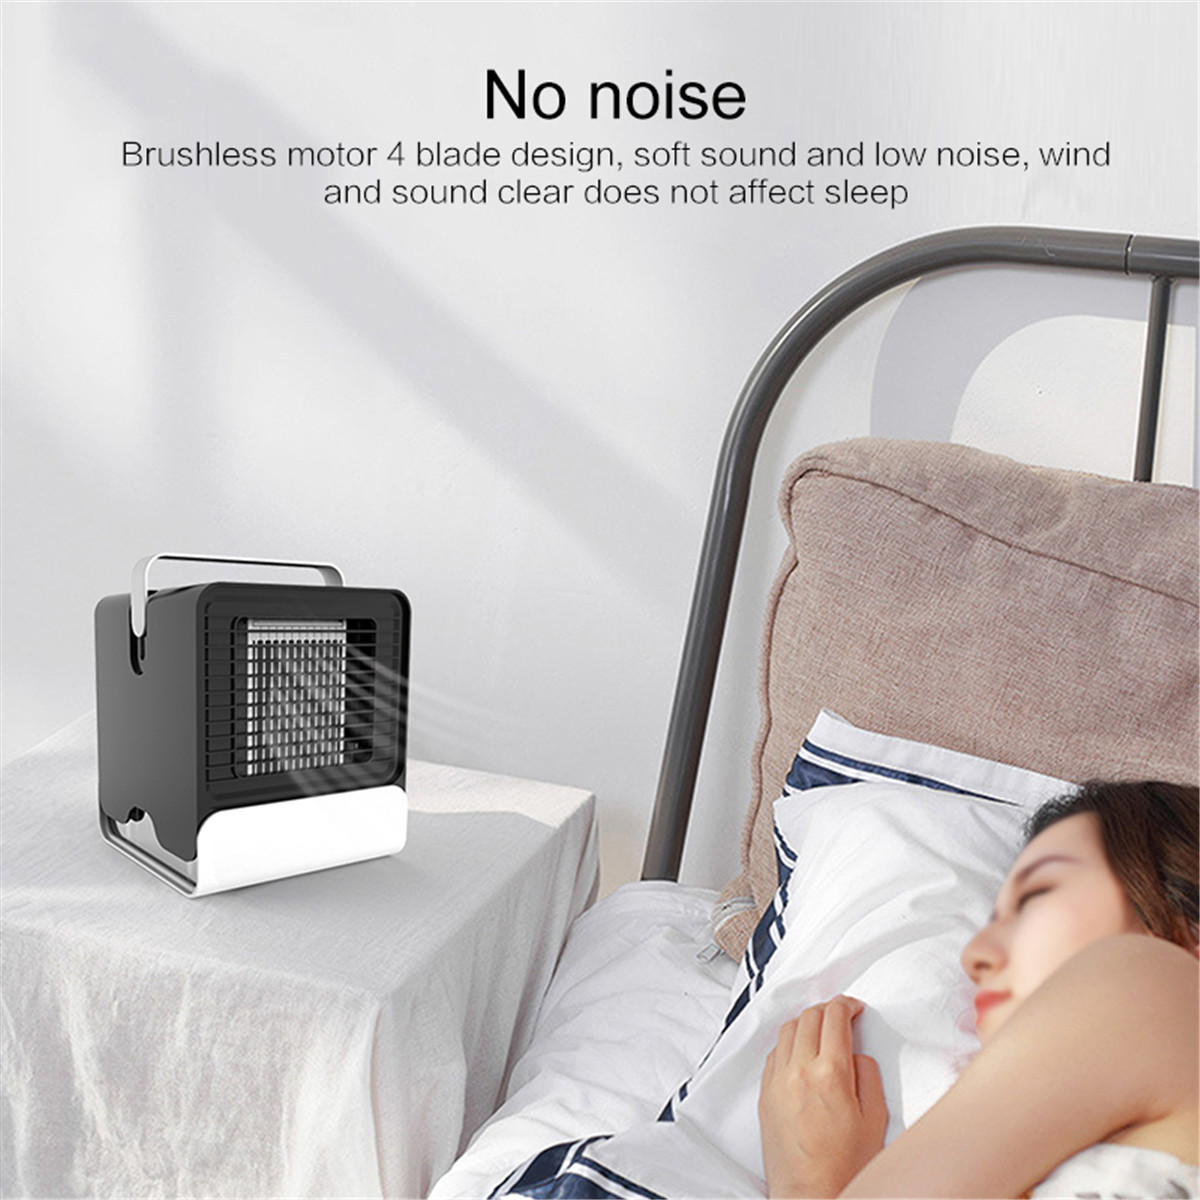 Mini-Portable-Air-Conditioner-Night-Light-Conditioning-Cooler-Humidifier-Purifier-USB-Desktop-Air-Co-1710195-11